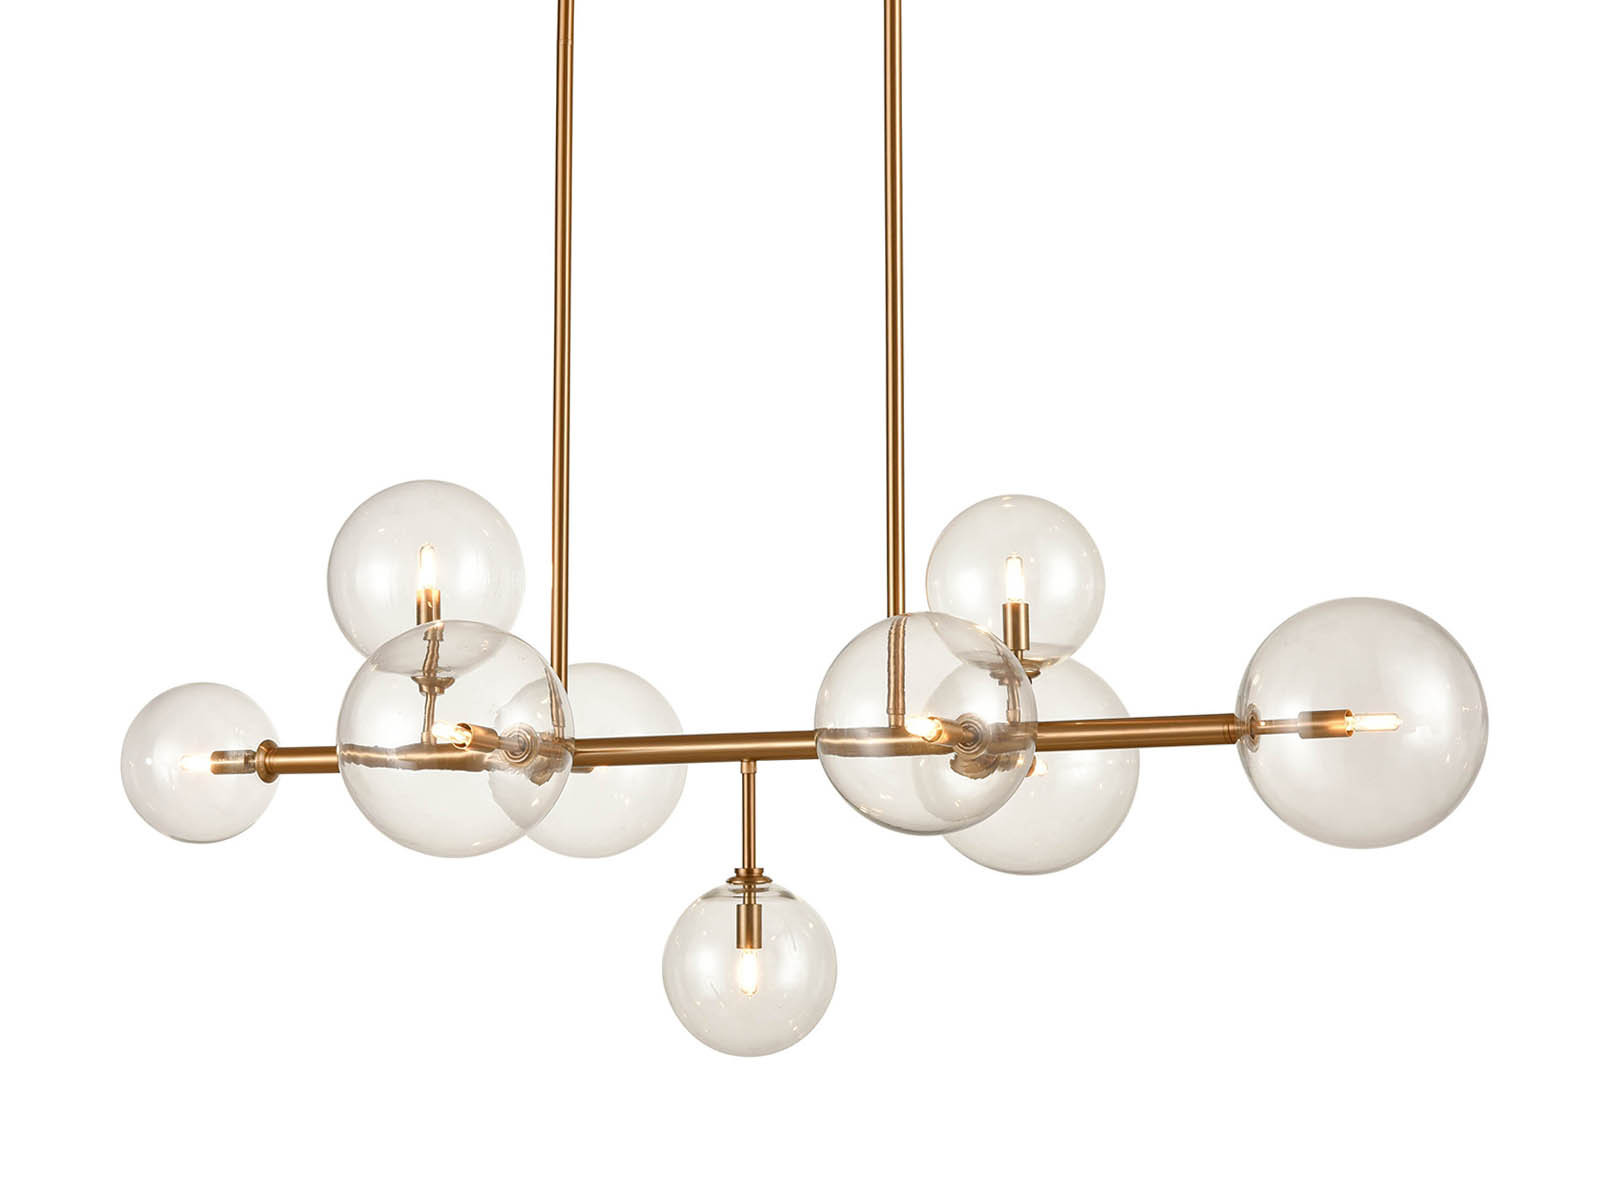 Avenue Lighting Delilah Collection